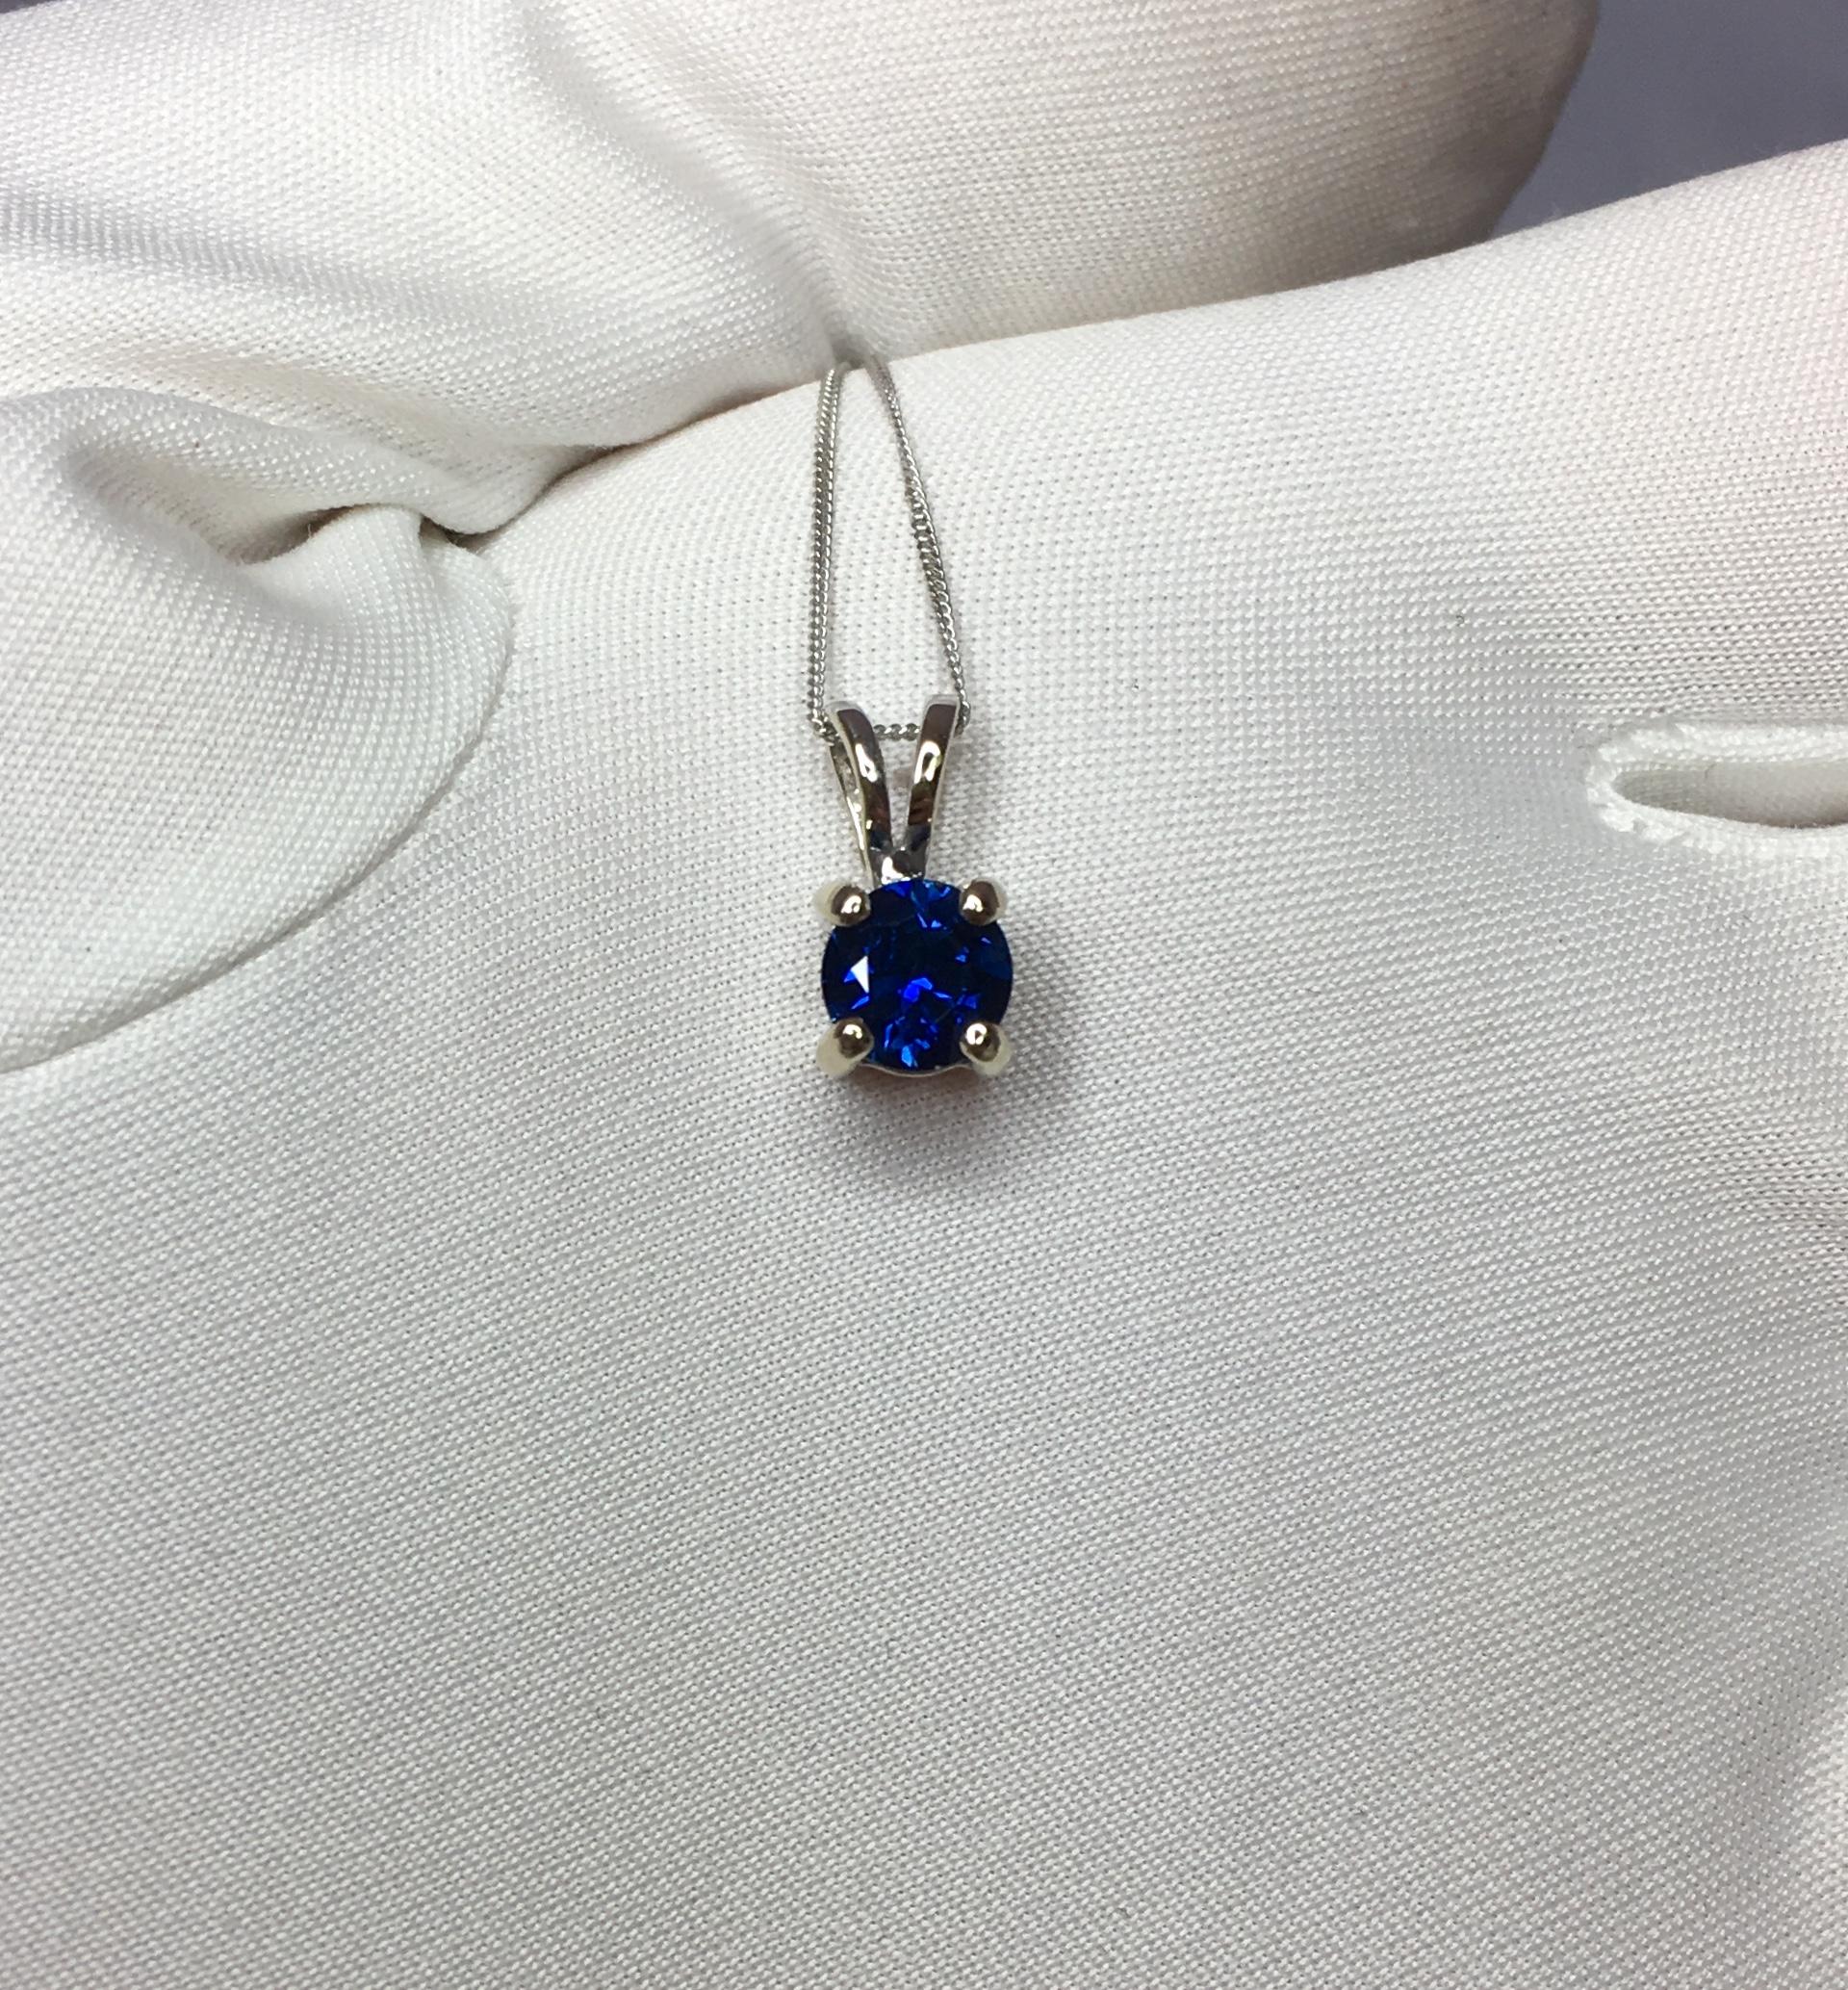 Beautiful natural 0.75 carat blue Sapphire set in a fine 18k white gold solitaire pendant.

Stunning blue sapphire with fine deep blue colour and excellent clarity. Very clean.

It also has an excellent round cut which shows lots of brightness and